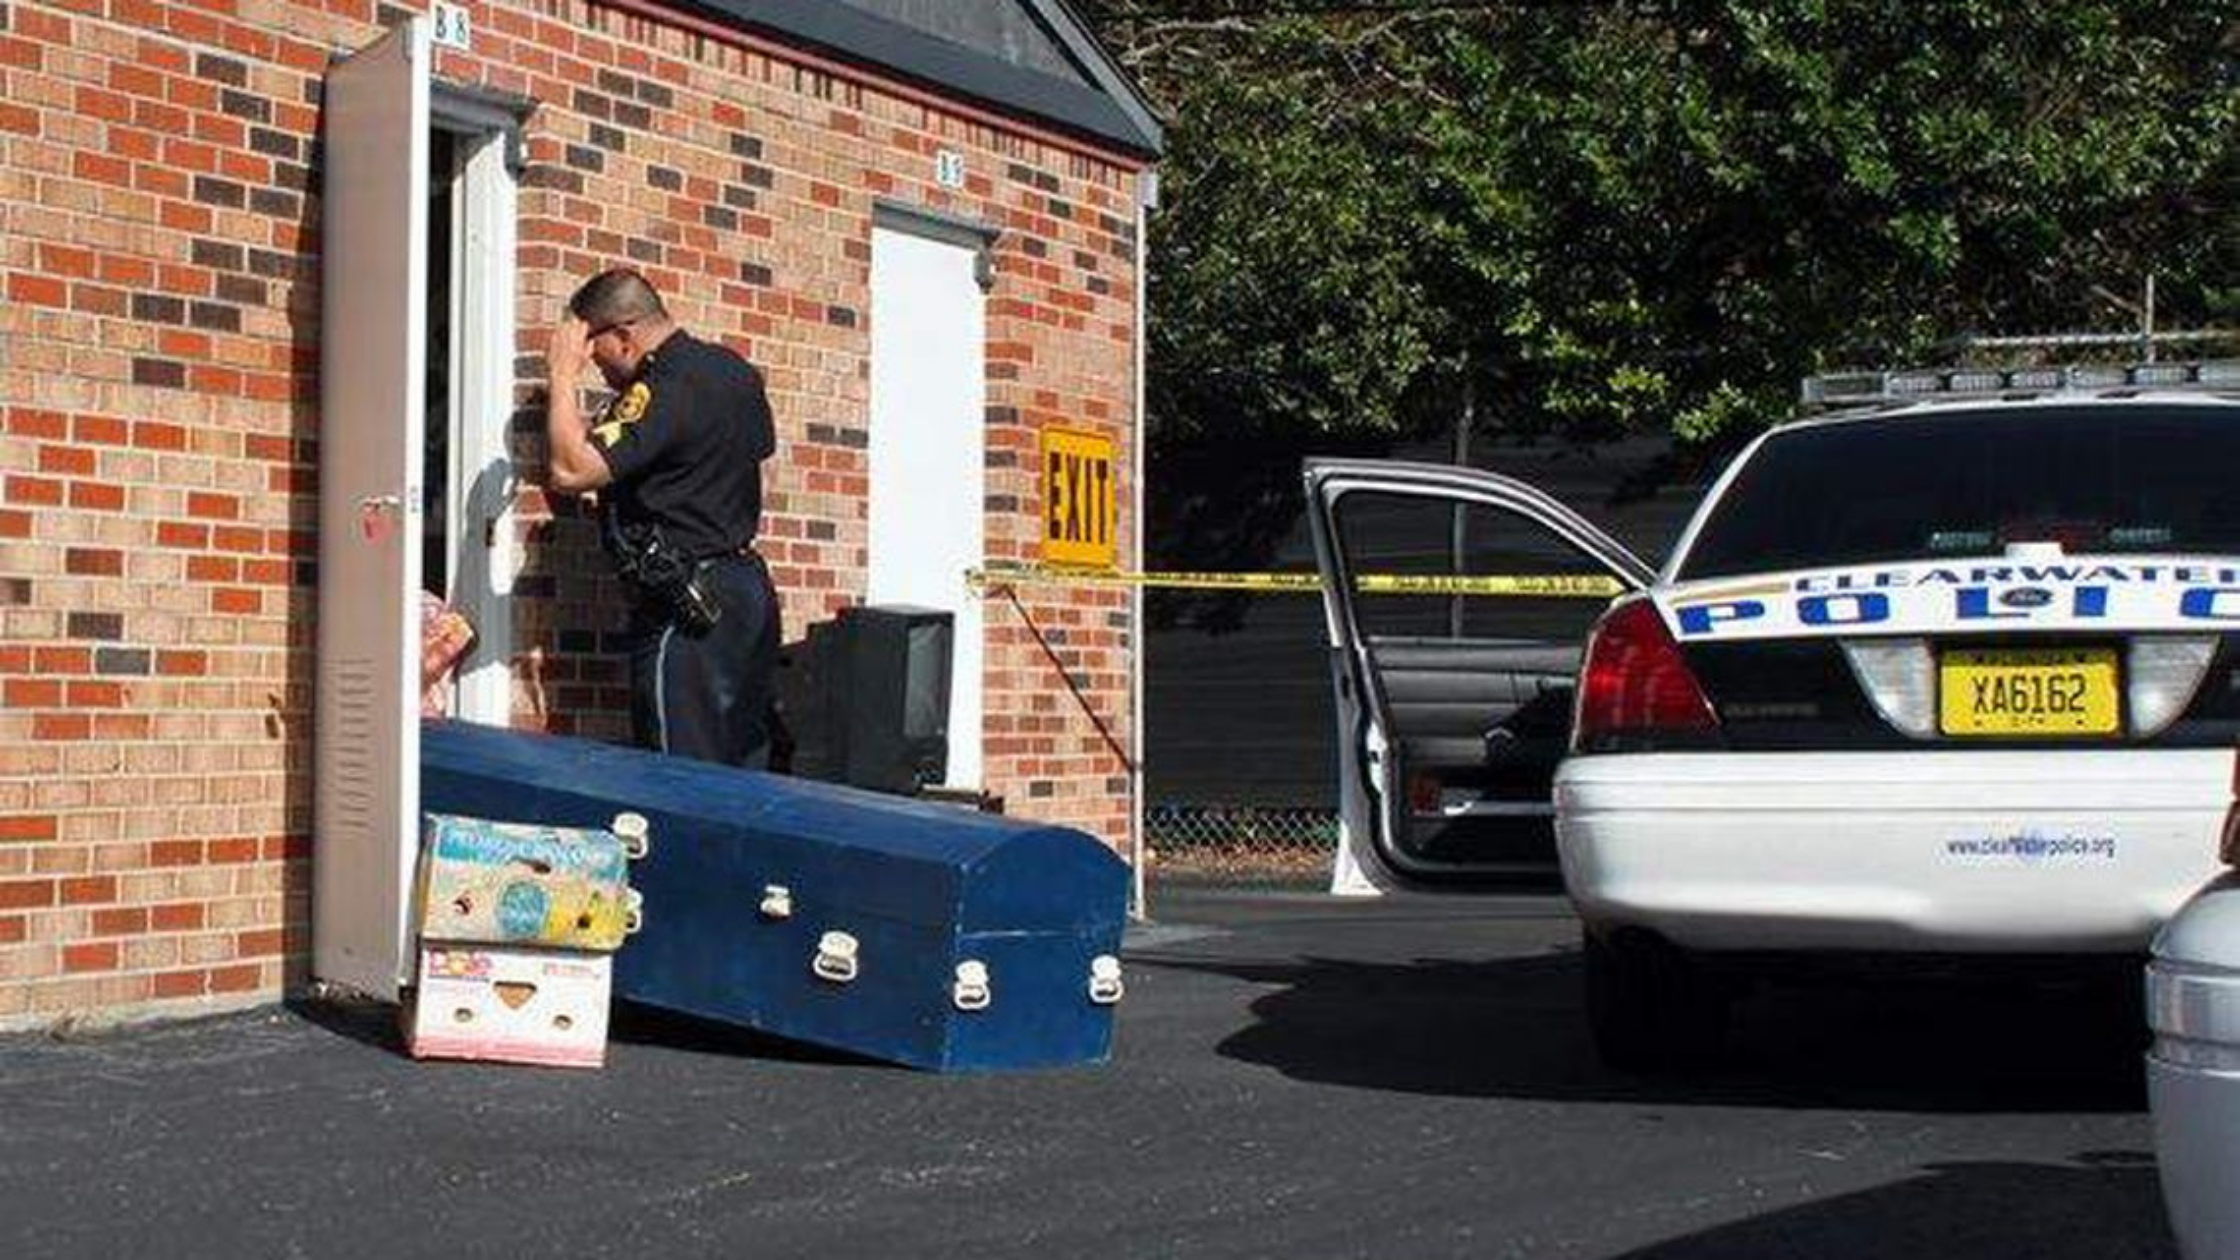 Police officer removing casket from self-storage unit.